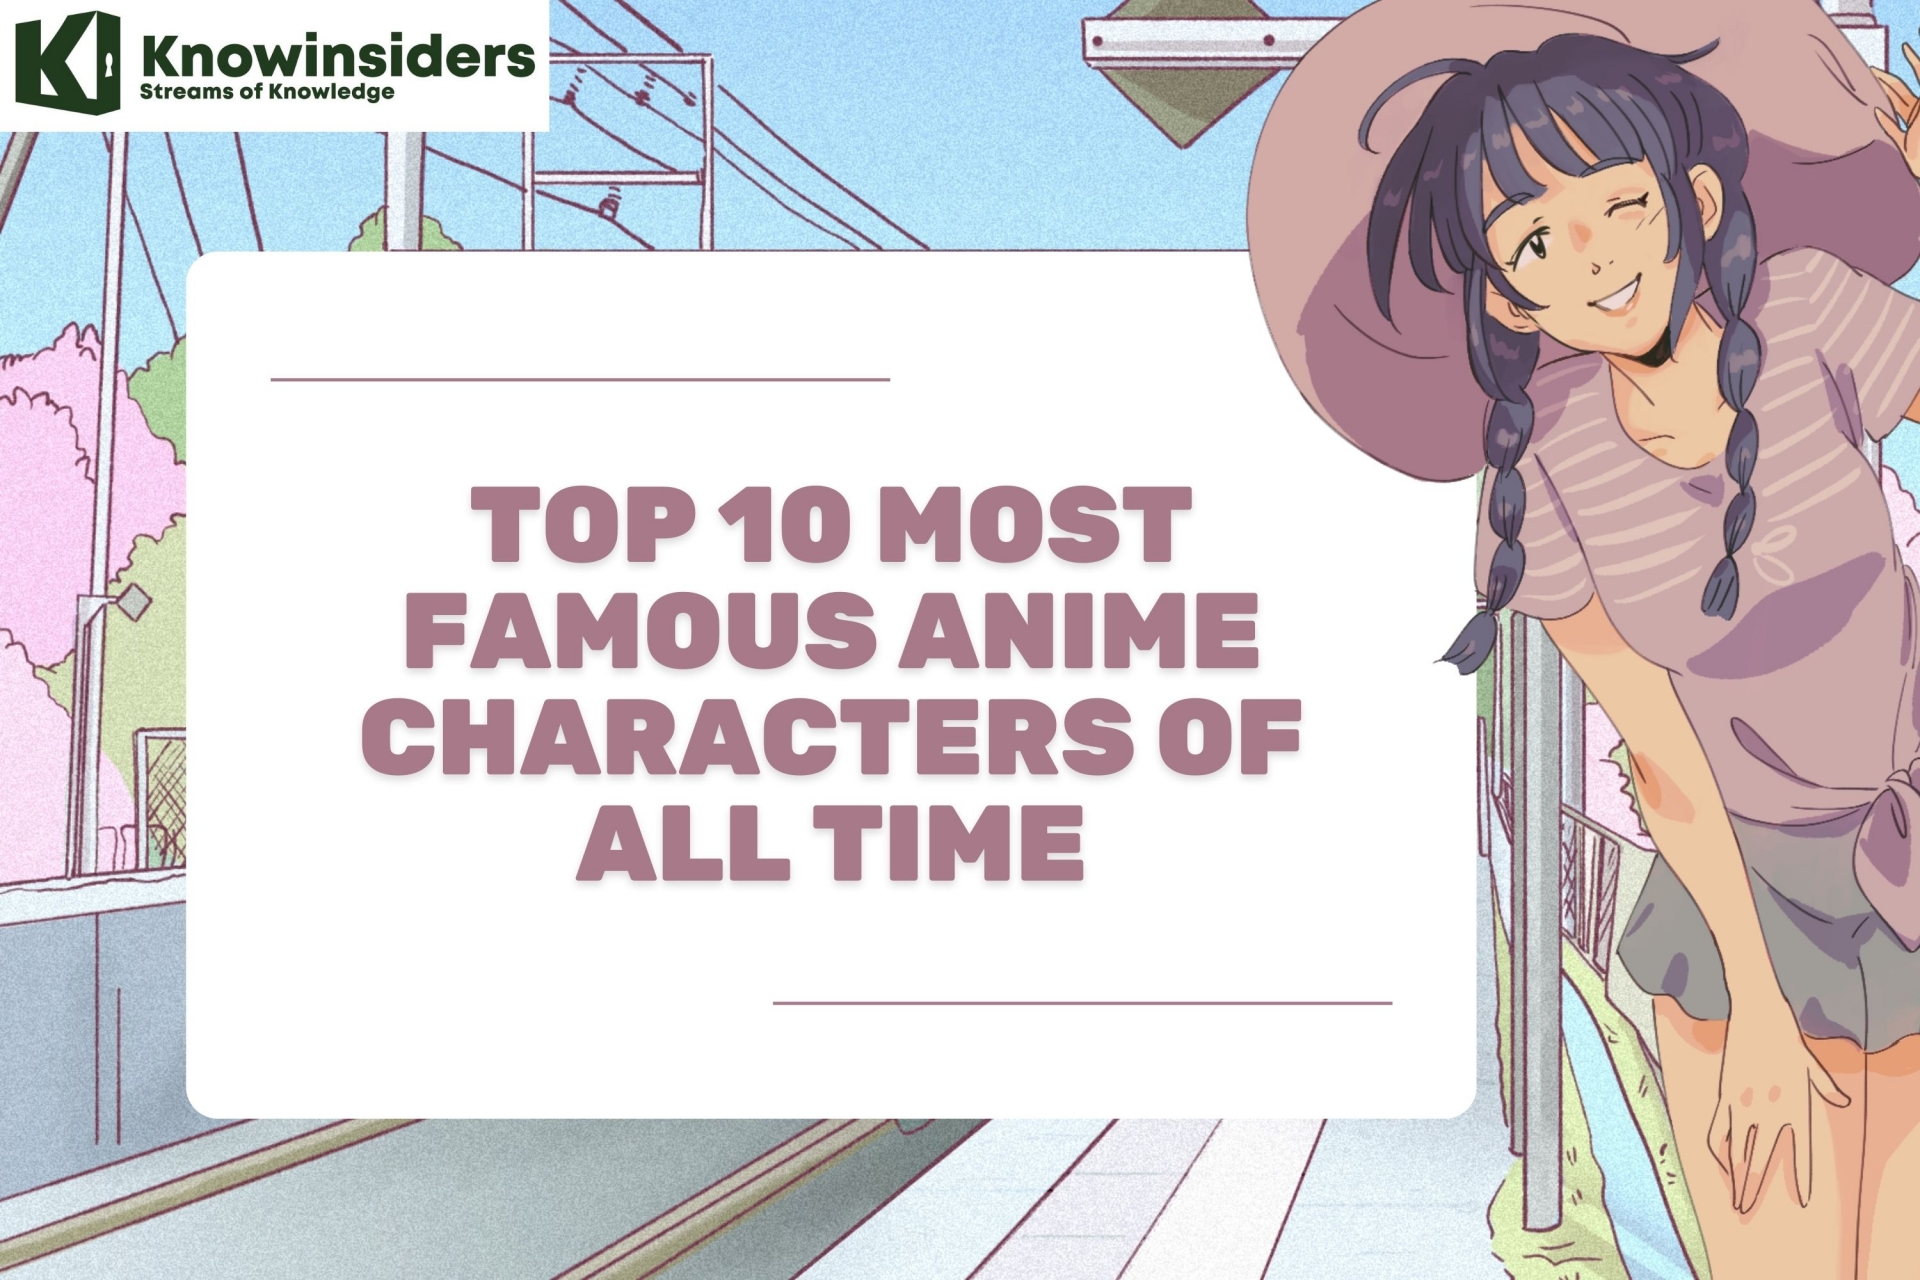 Top 10 Most Famous Anime Characters of All Time